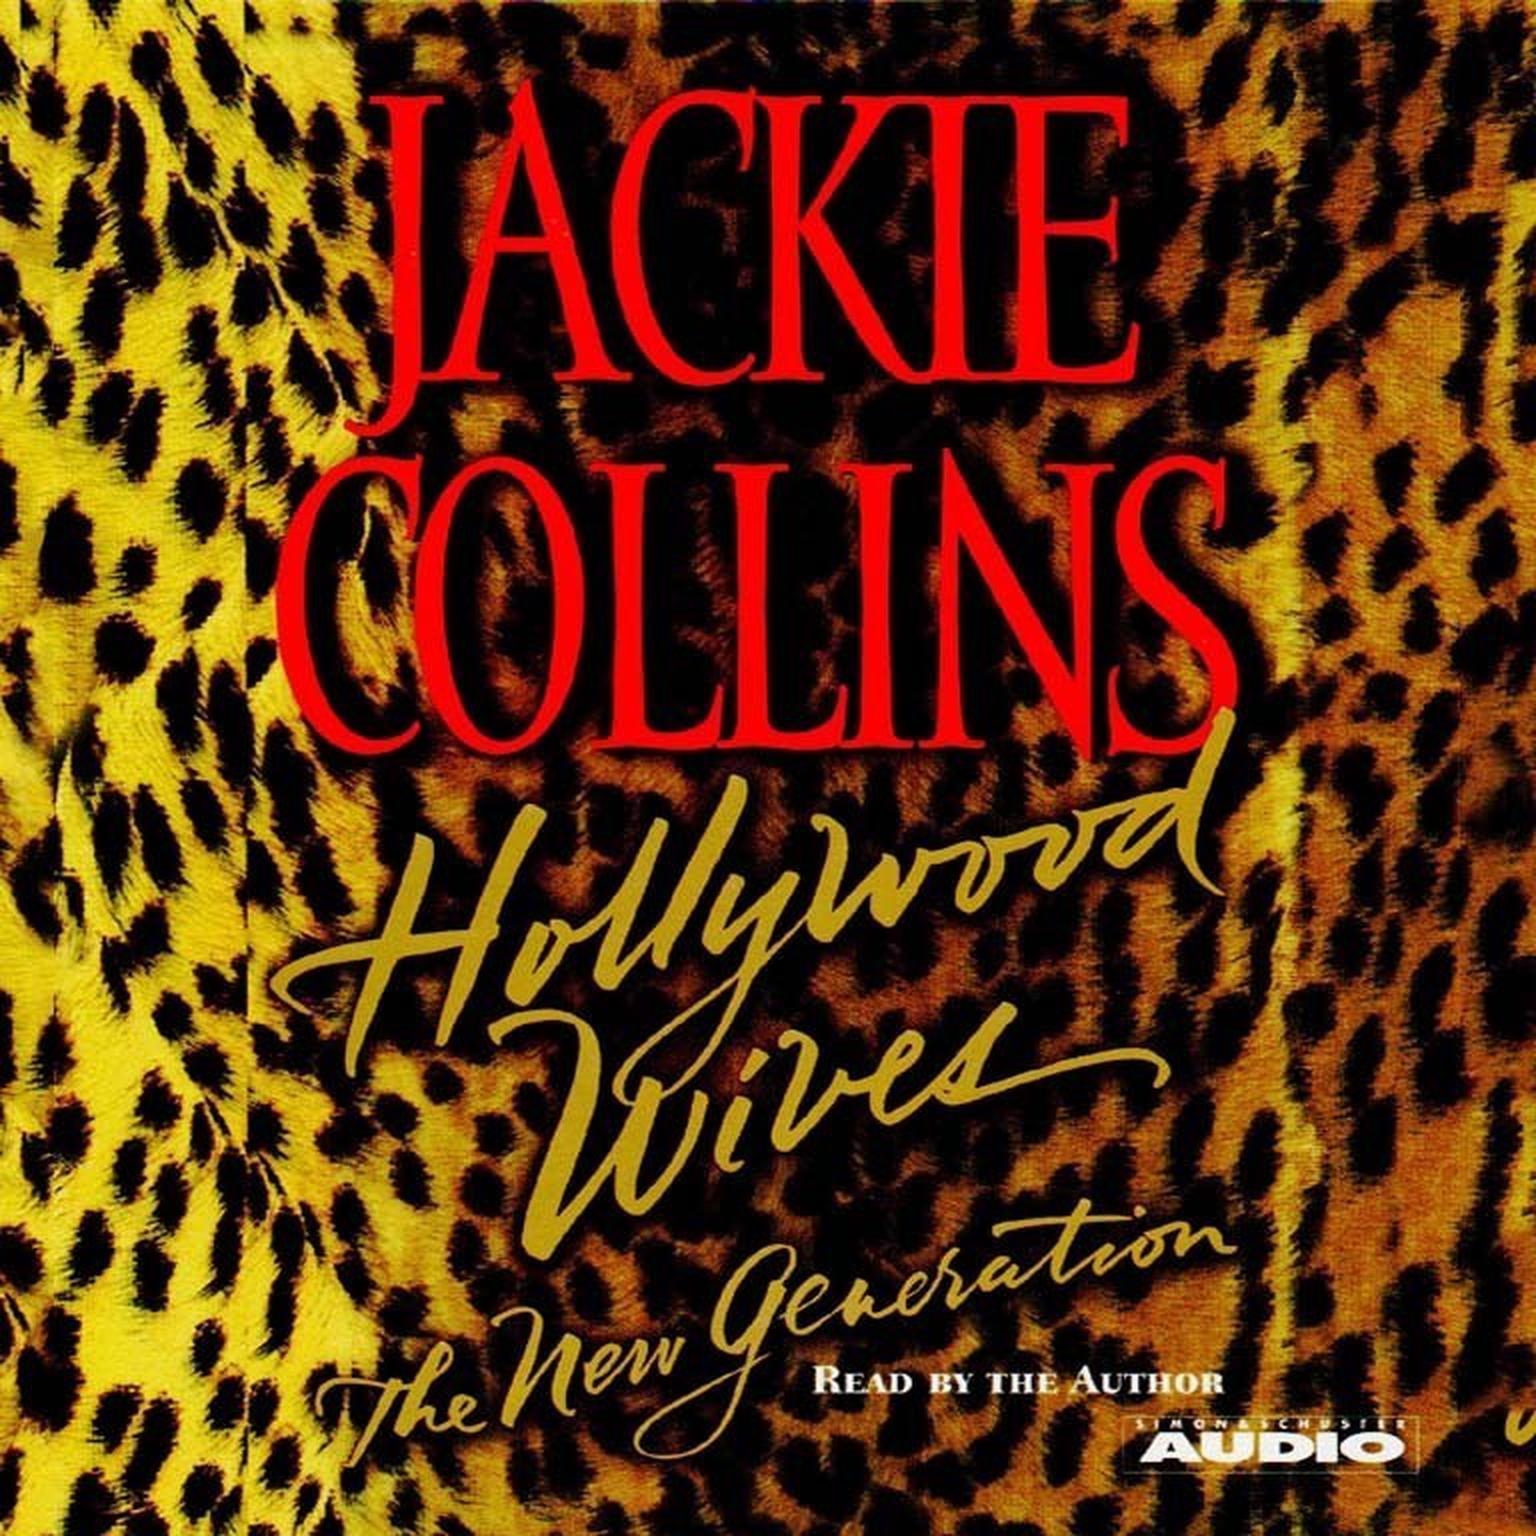 Hollywood Wives - The New Generation (Abridged) Audiobook, by Jackie Collins